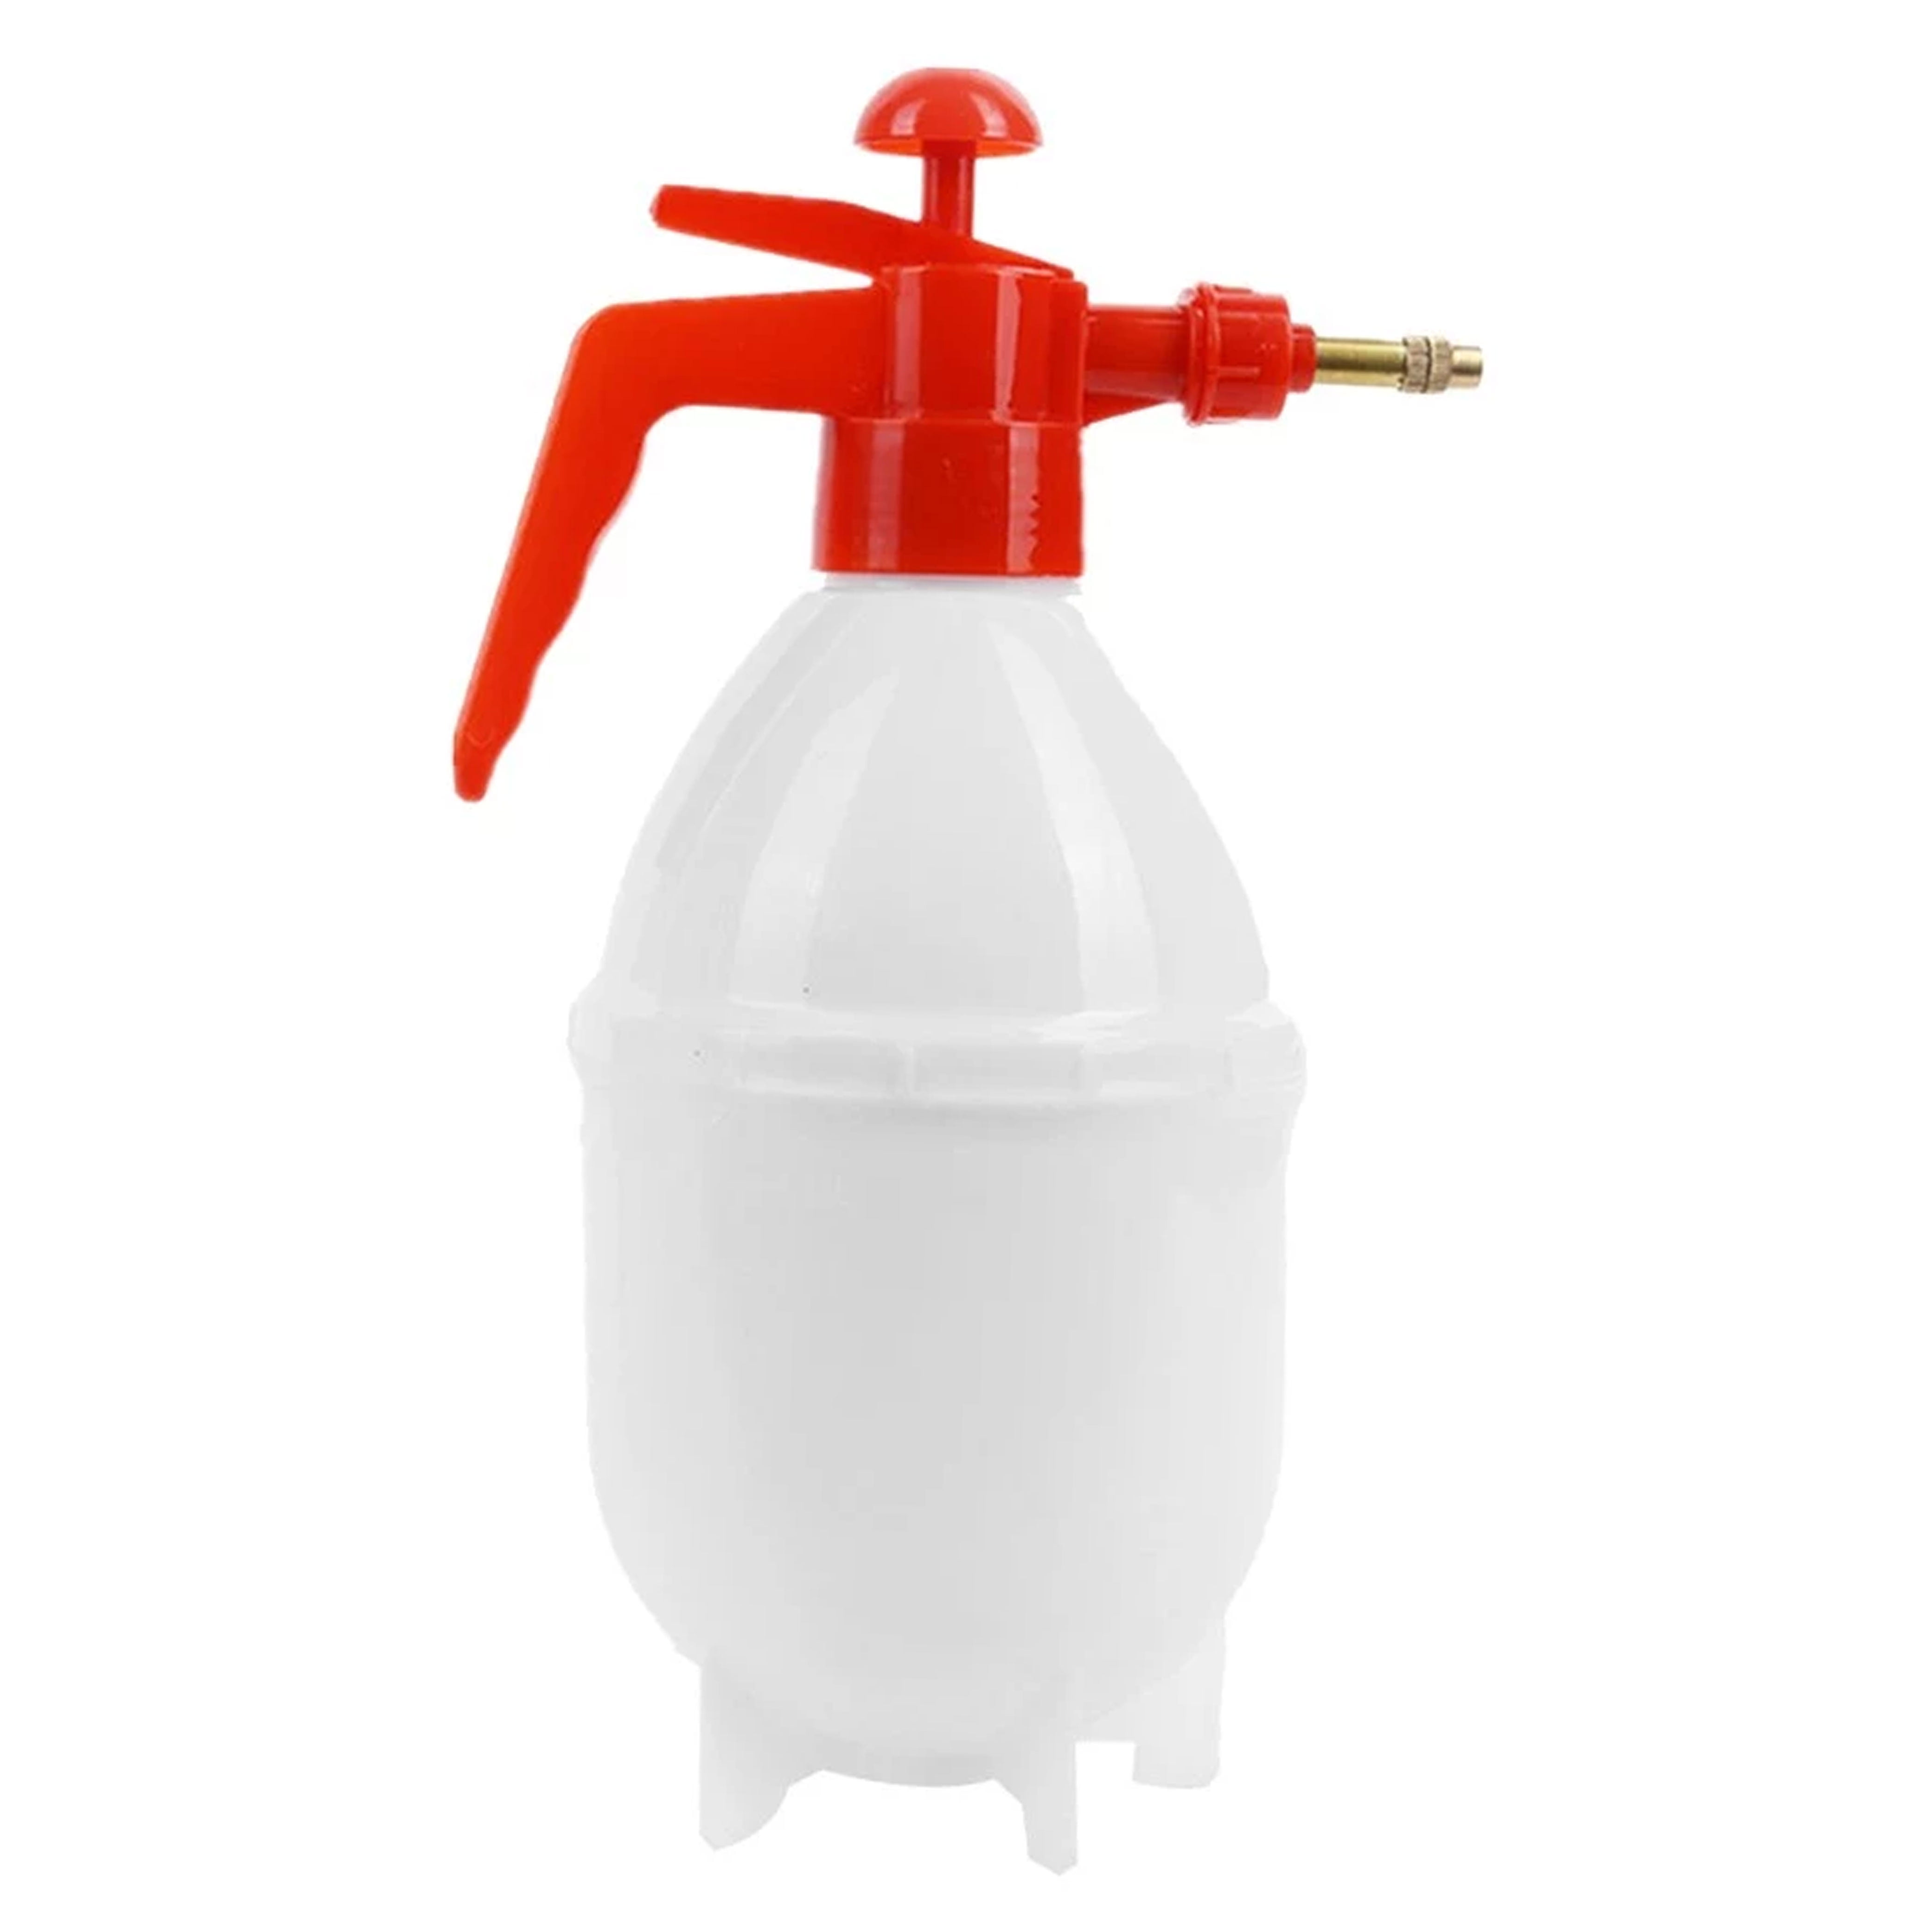 1pc High Pressure Car Wash Spray Bottle Hand Pump Sprayer Alcohol  Disinfection Horticulture Household Car Film 2l Watering Can